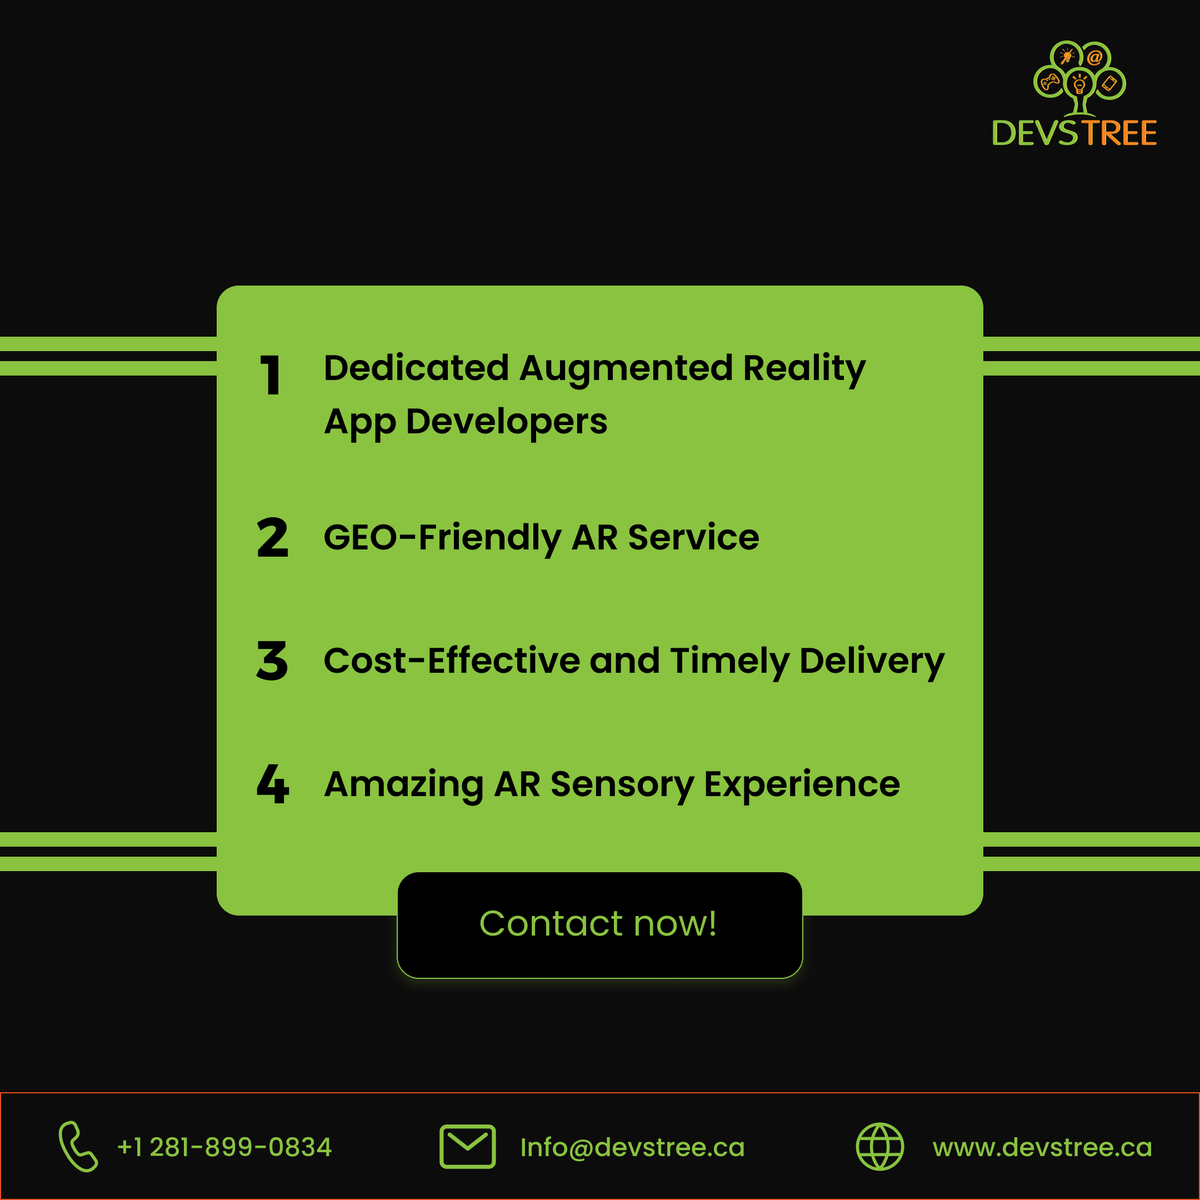 We offer a wide range of augmented reality development services, from concept to completion. 🚀 

📧 Shoot us an email at: info@devstree.ca, or give us a call at 📞+1 281-899-0834.

#AugmentedReality #AR #ARapp #ARgames #ARtechnology #ARexperience #devstree #it #canada